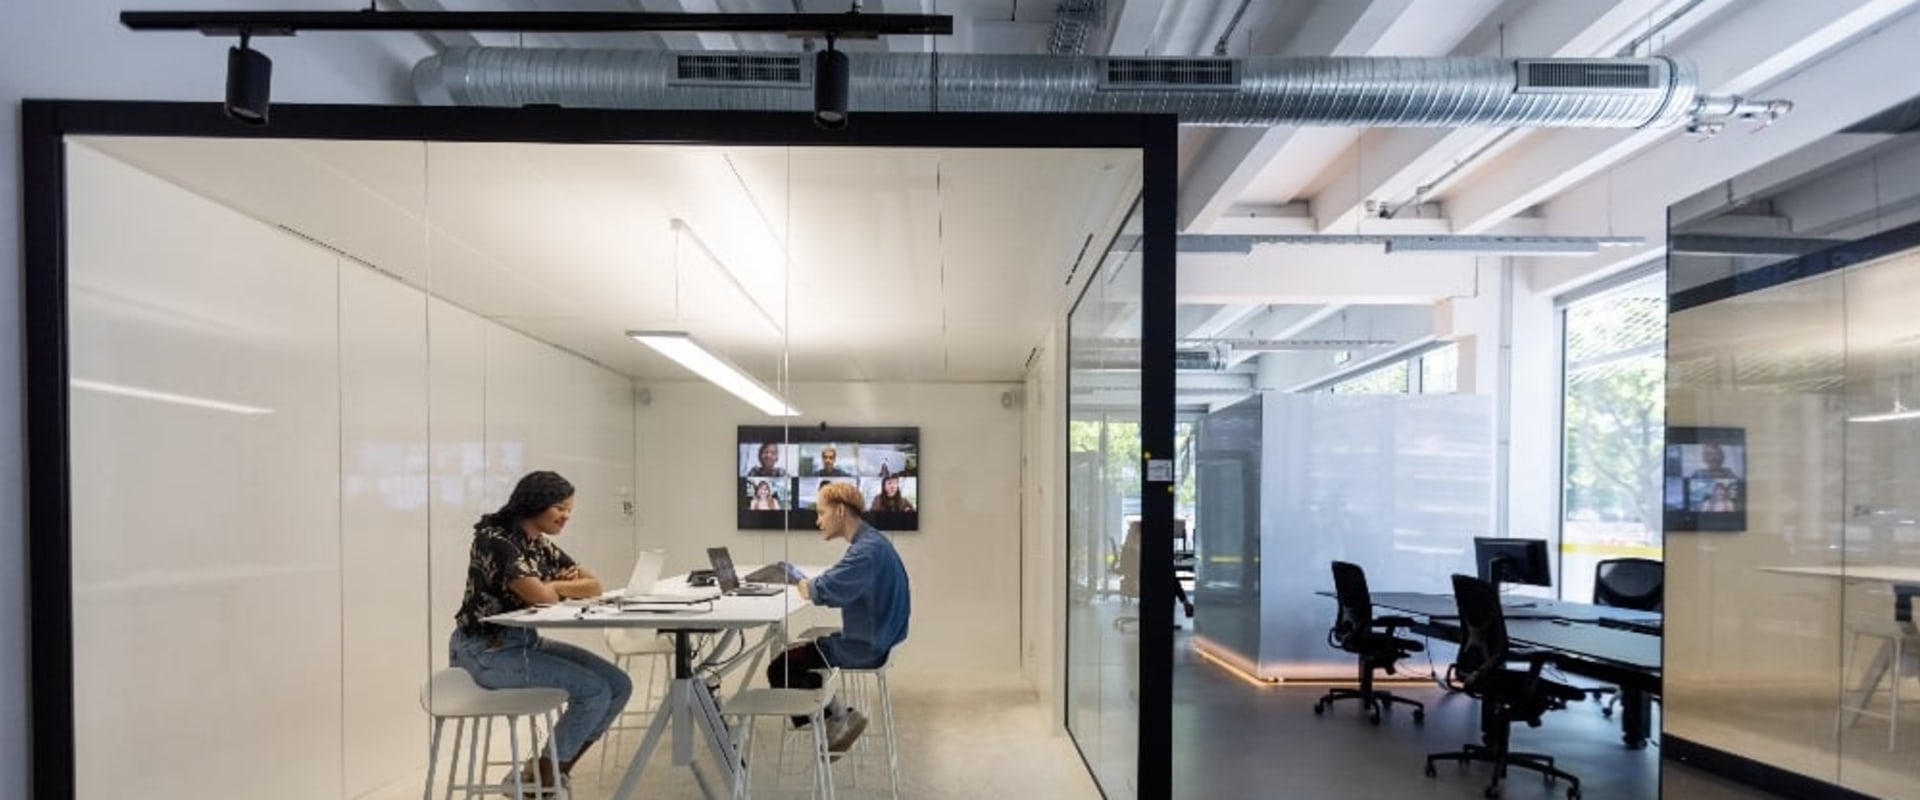 How much space is required per person in an office?